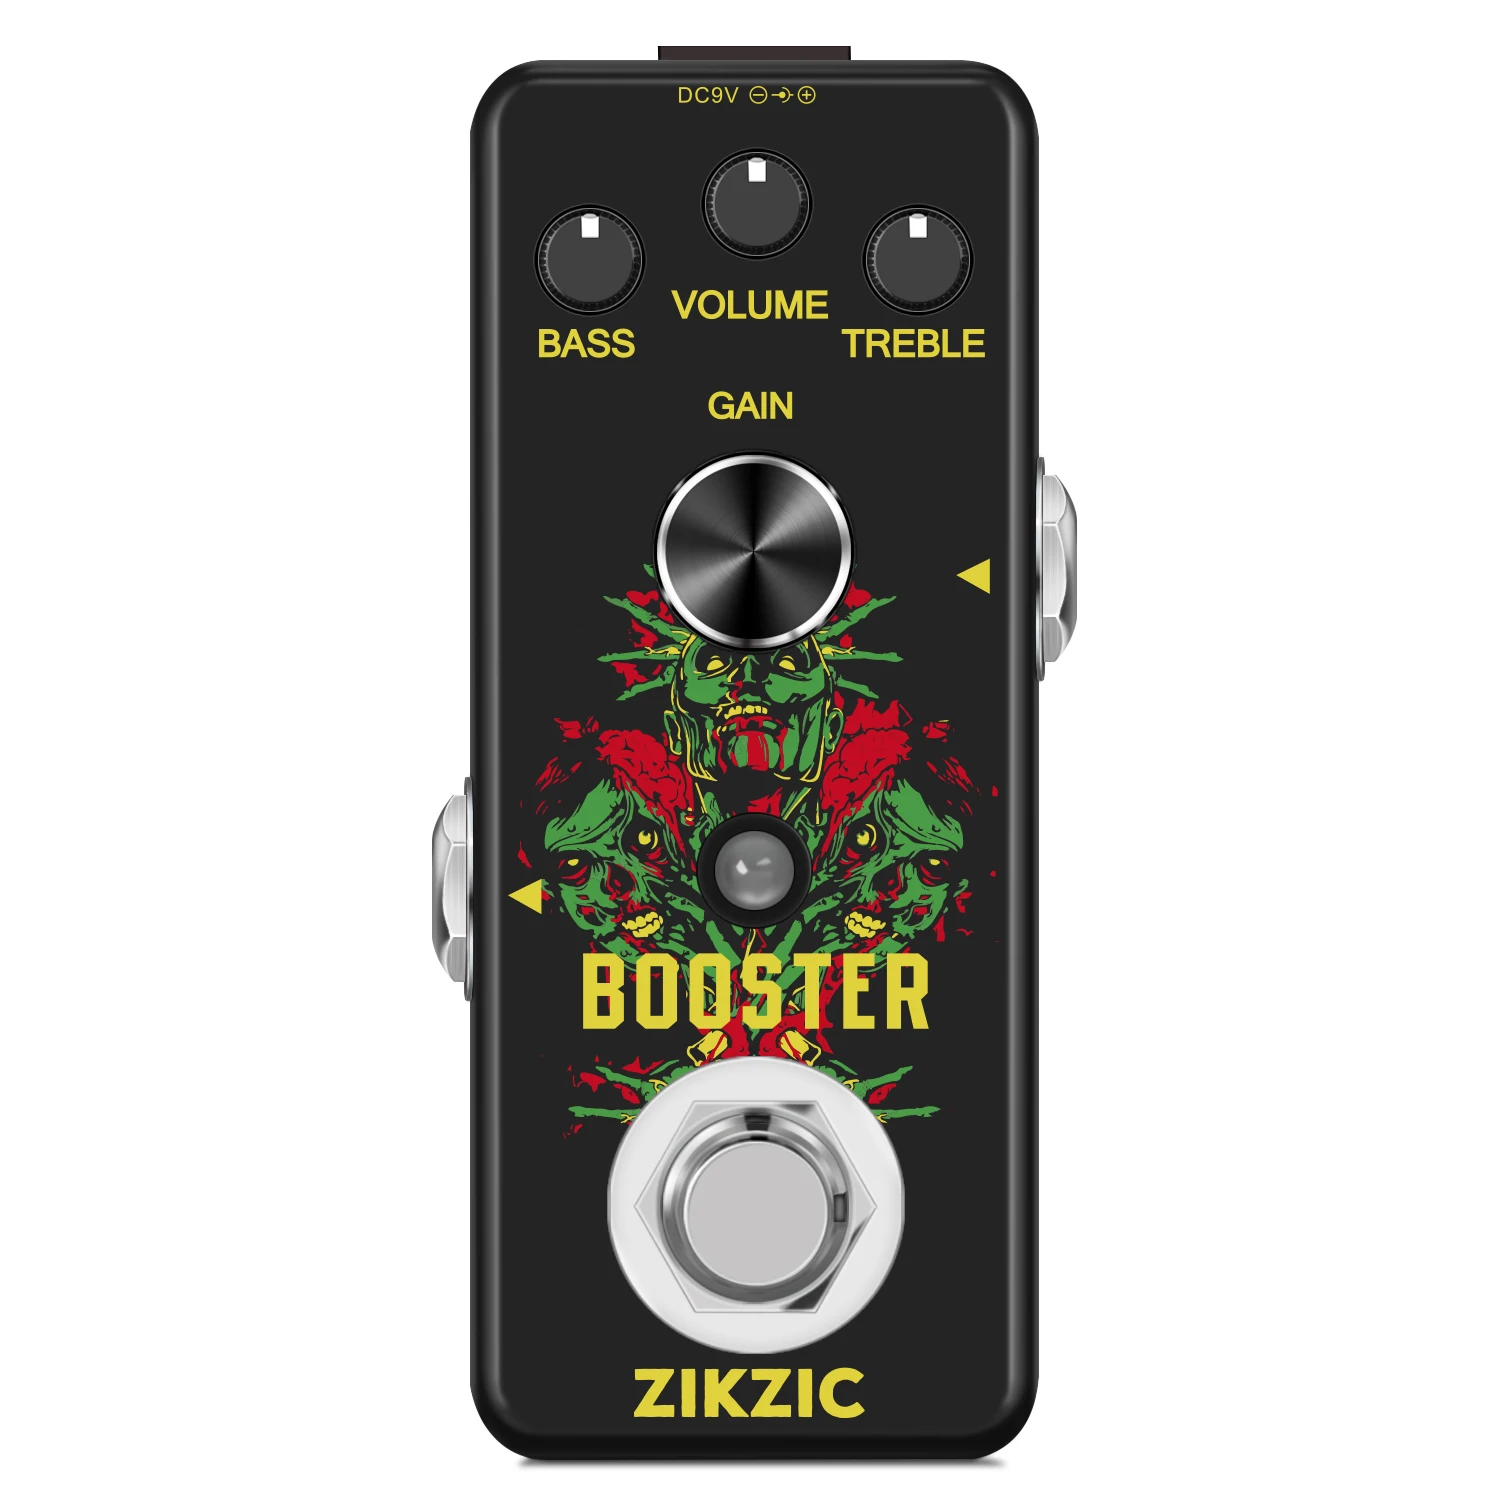 Zikzic LEF-318 Guitar Booster Pedal Pure Boost Effect Pedals Analog Pure Signal Amplification Sound Encouraging rowin lef 301b guitar distortion pedal solo dist effect pedals for guitarist high gain distortions pedals natural tight classic